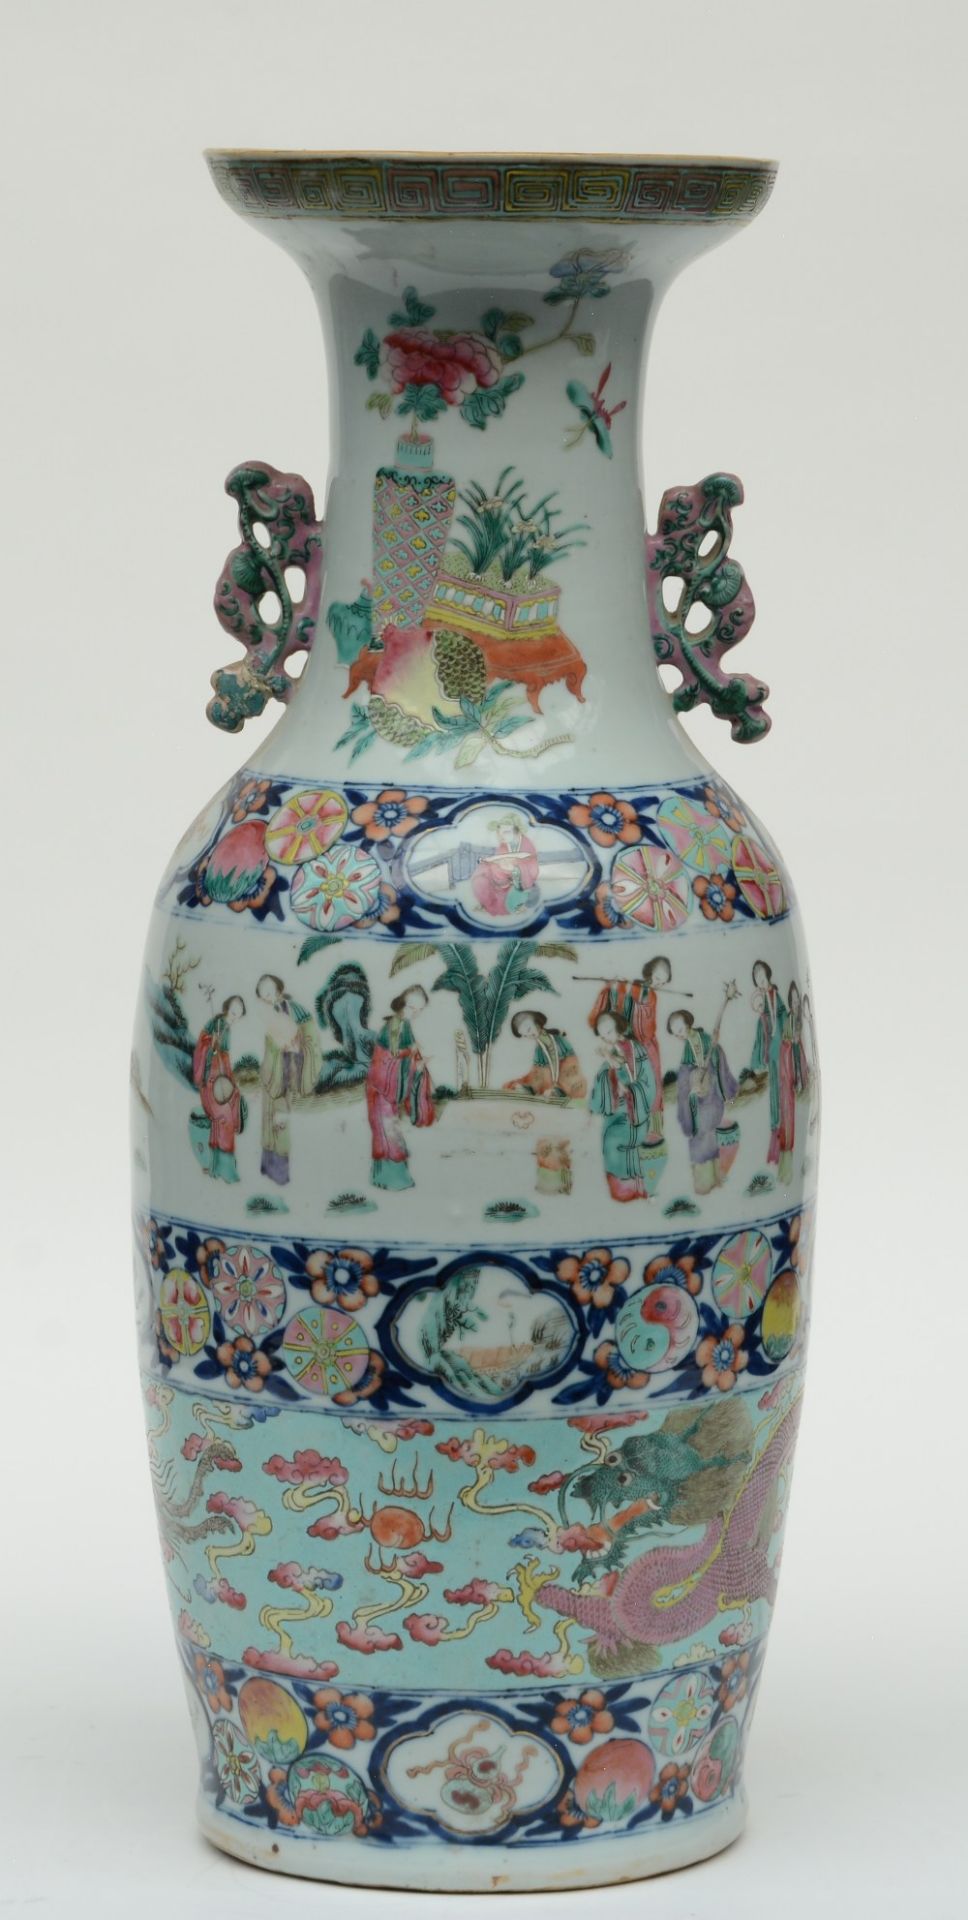 A Chinese polychrome vase, decorated with several animated scenes, dragons and other symbols, 19thC, - Image 3 of 6